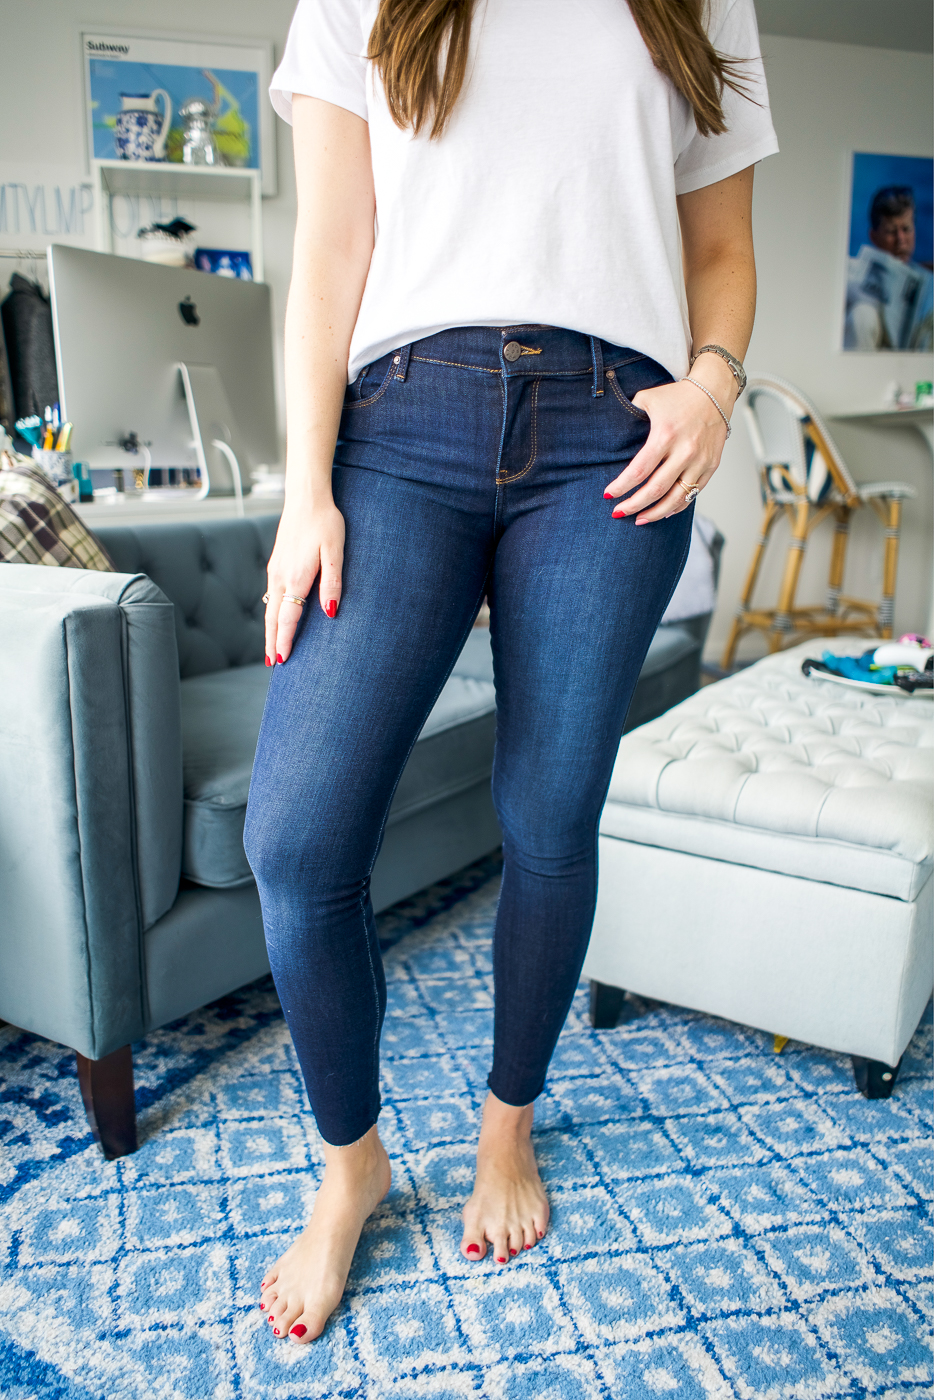 Mott & Bow Denim Review + Promo Code | Connecticut Fashion and ...